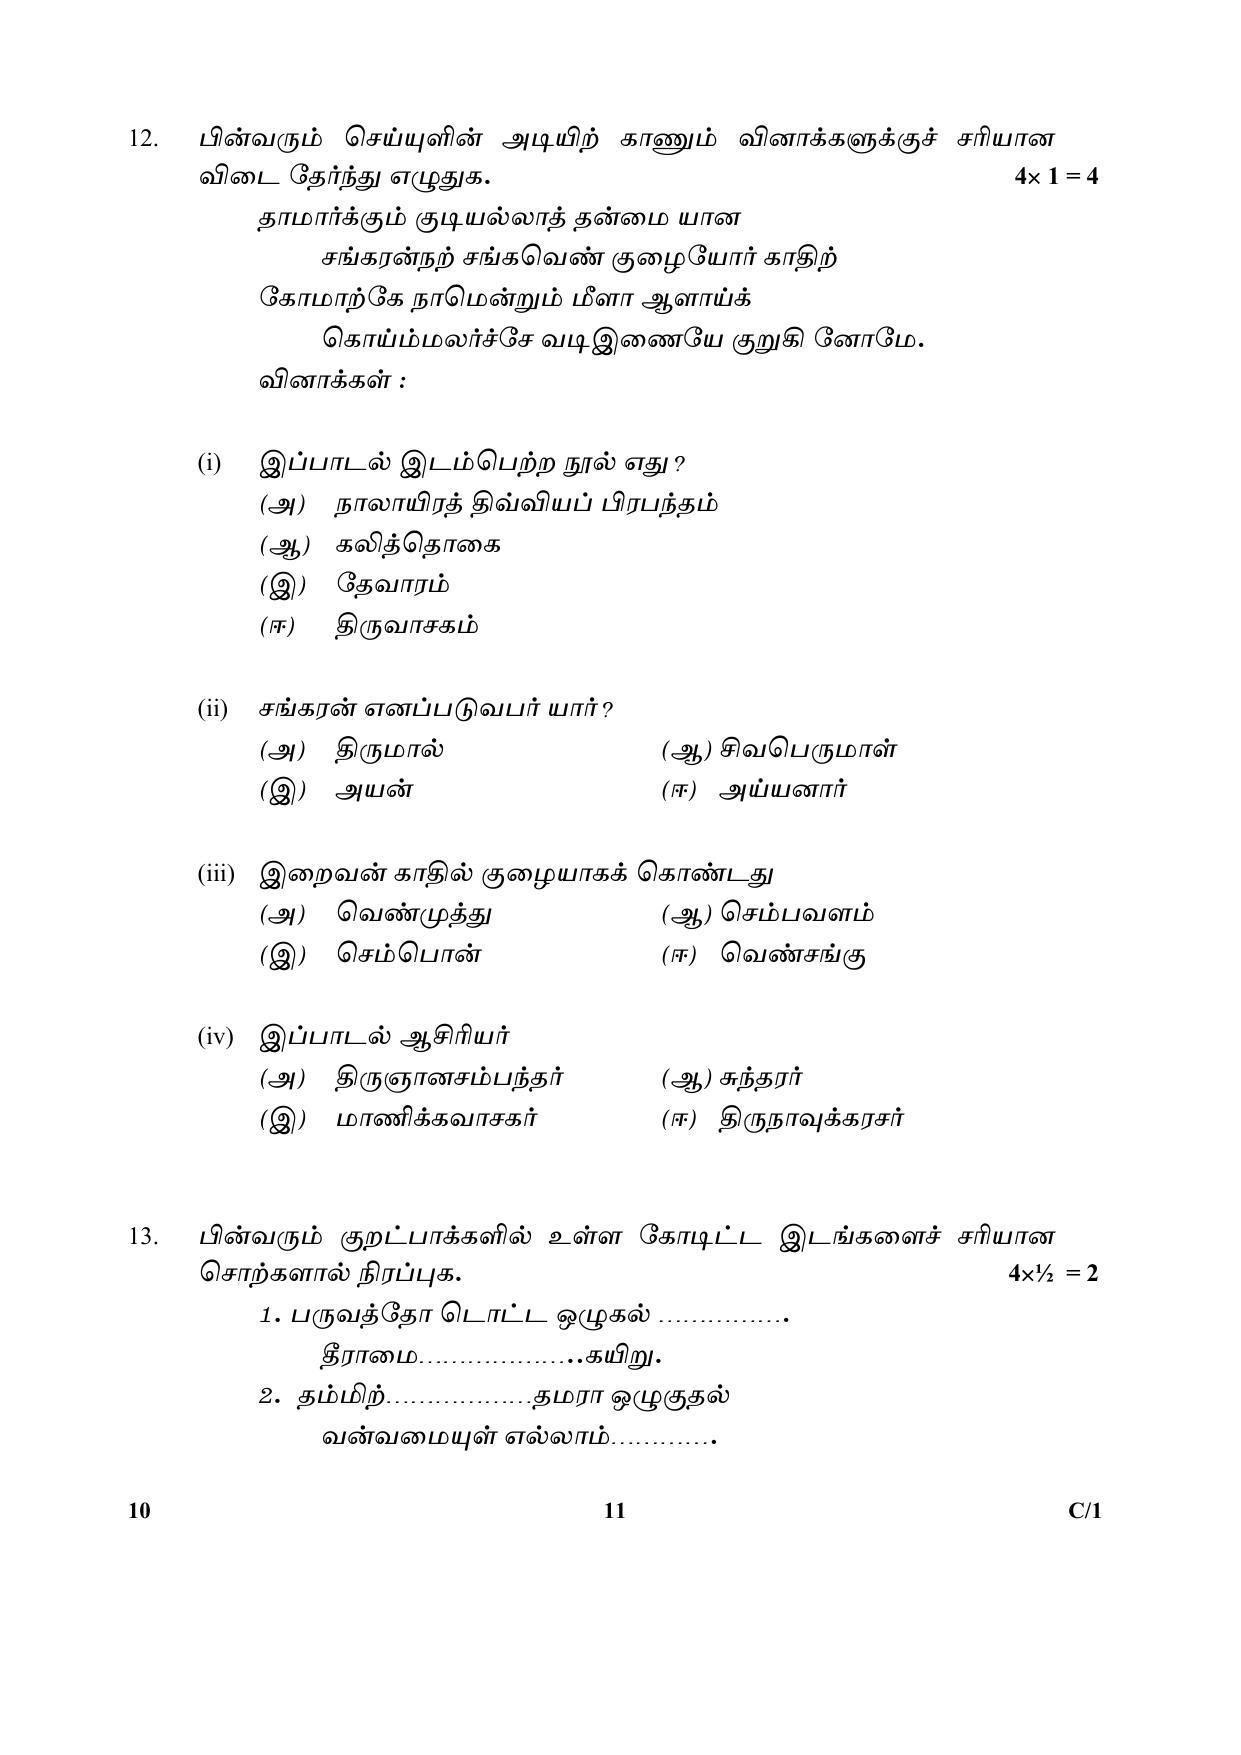 CBSE Class 10 10 (Tamil) 2018 Compartment Question Paper - Page 11